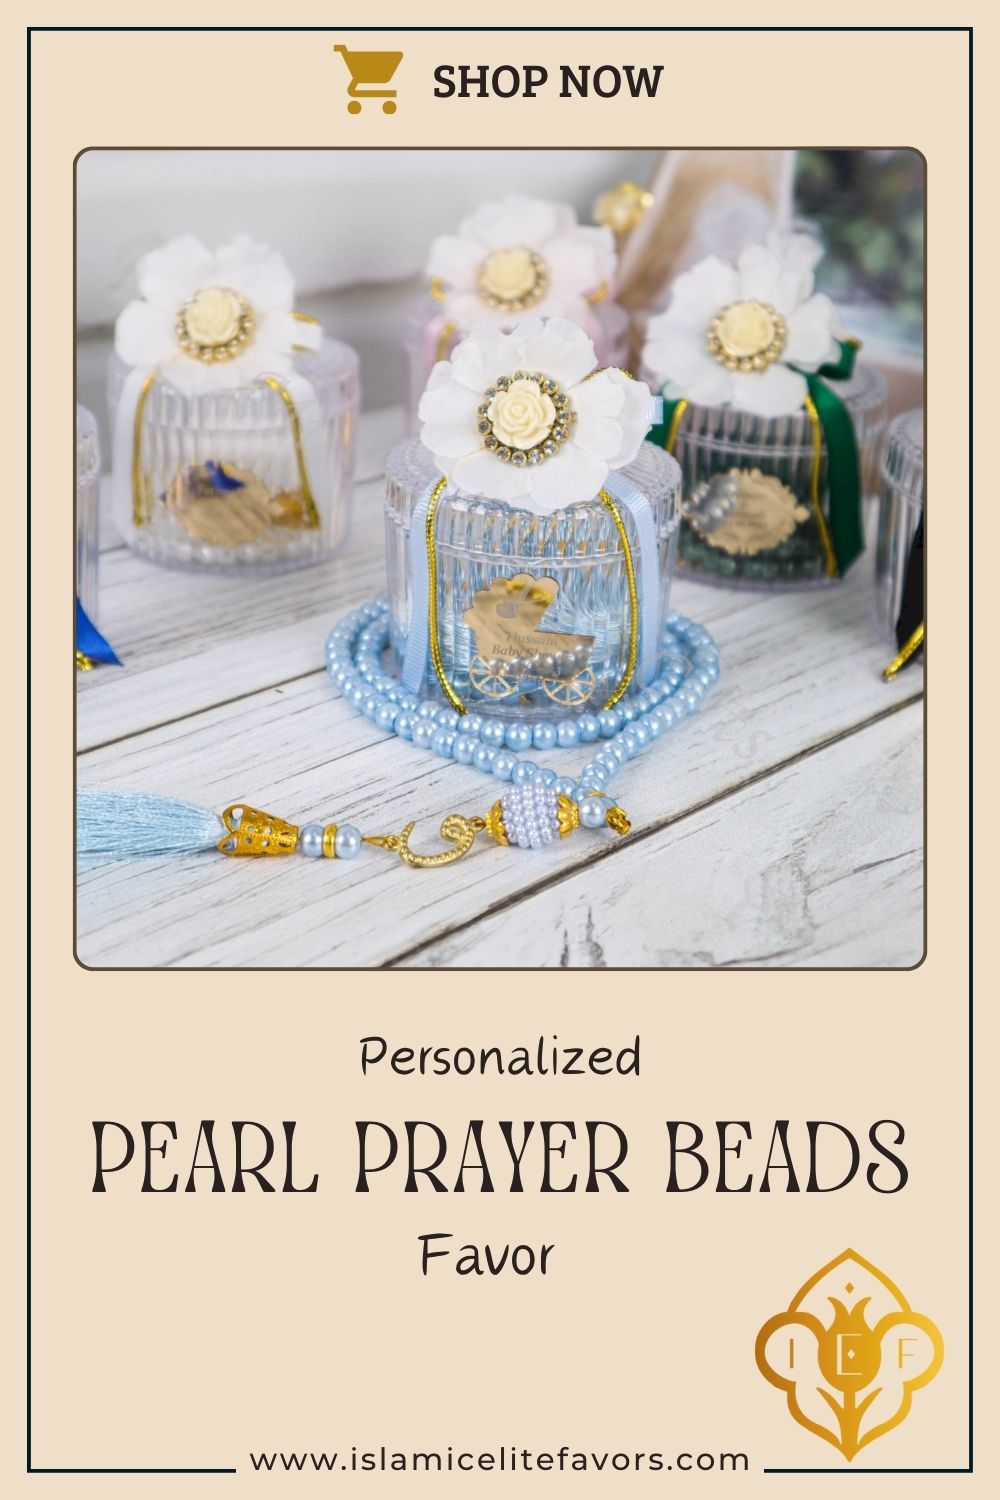 Personalized Prayer Beads Tasbeeh Islamic Wedding Baby Shower Gift - Islamic Elite Favors is a handmade gift shop offering a wide variety of unique and personalized gifts for all occasions. Whether you're looking for the perfect Ramadan, Eid, Hajj, wedding gift or something special for a birthday, baby shower or anniversary, we have something for everyone. High quality, made with love.